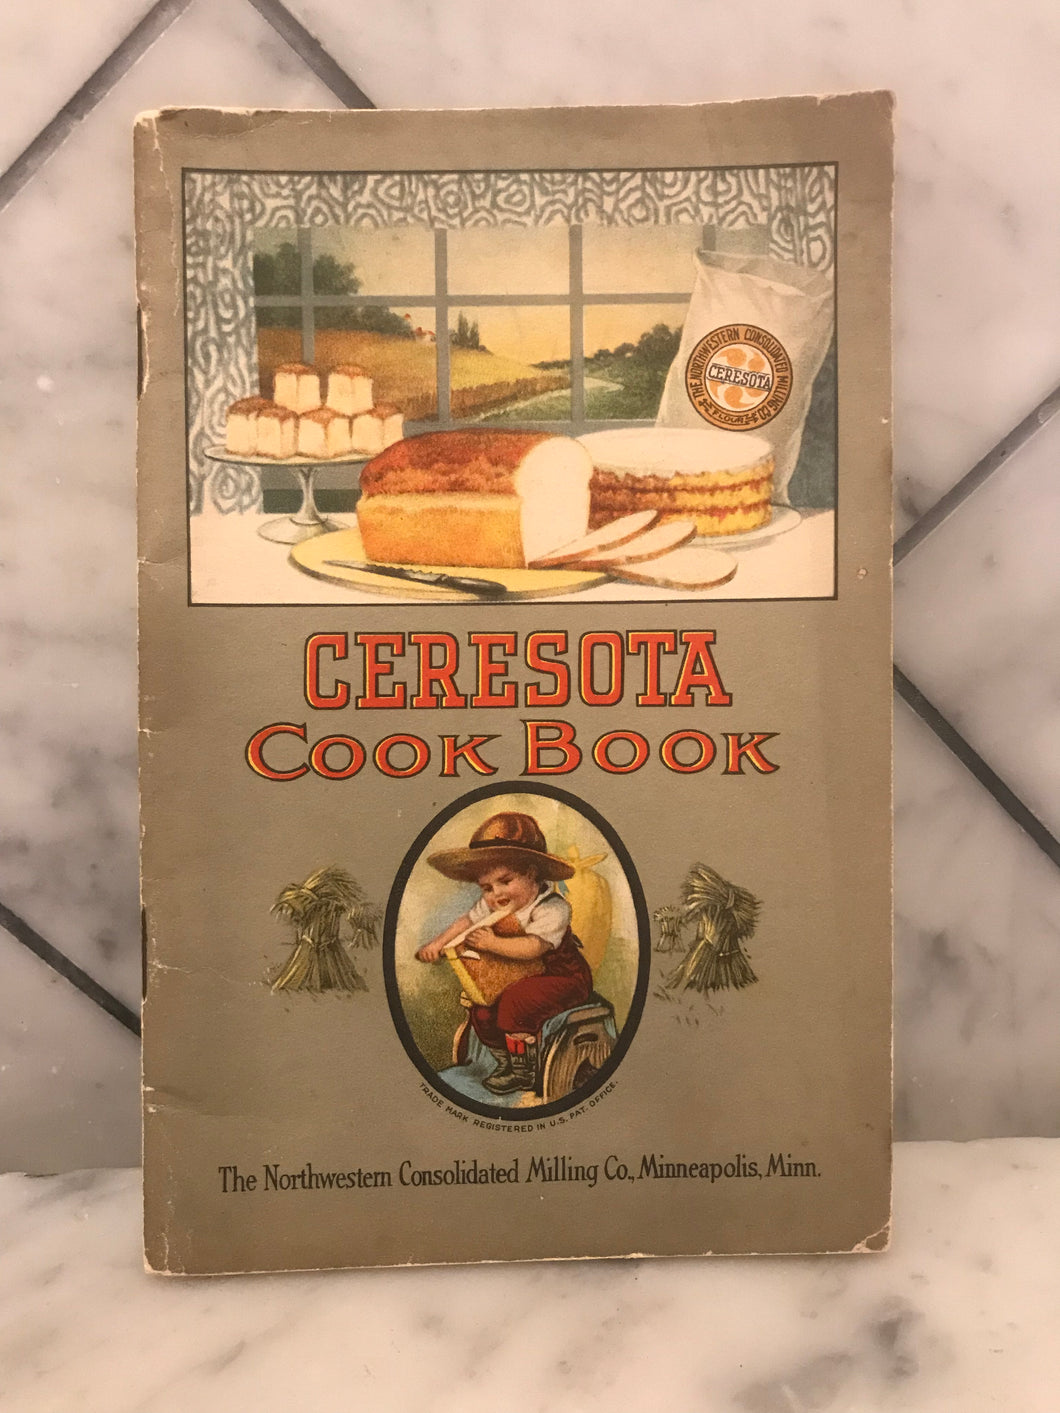 Ceresota Cook Book, The Northwestern Consolidated Milling Co.